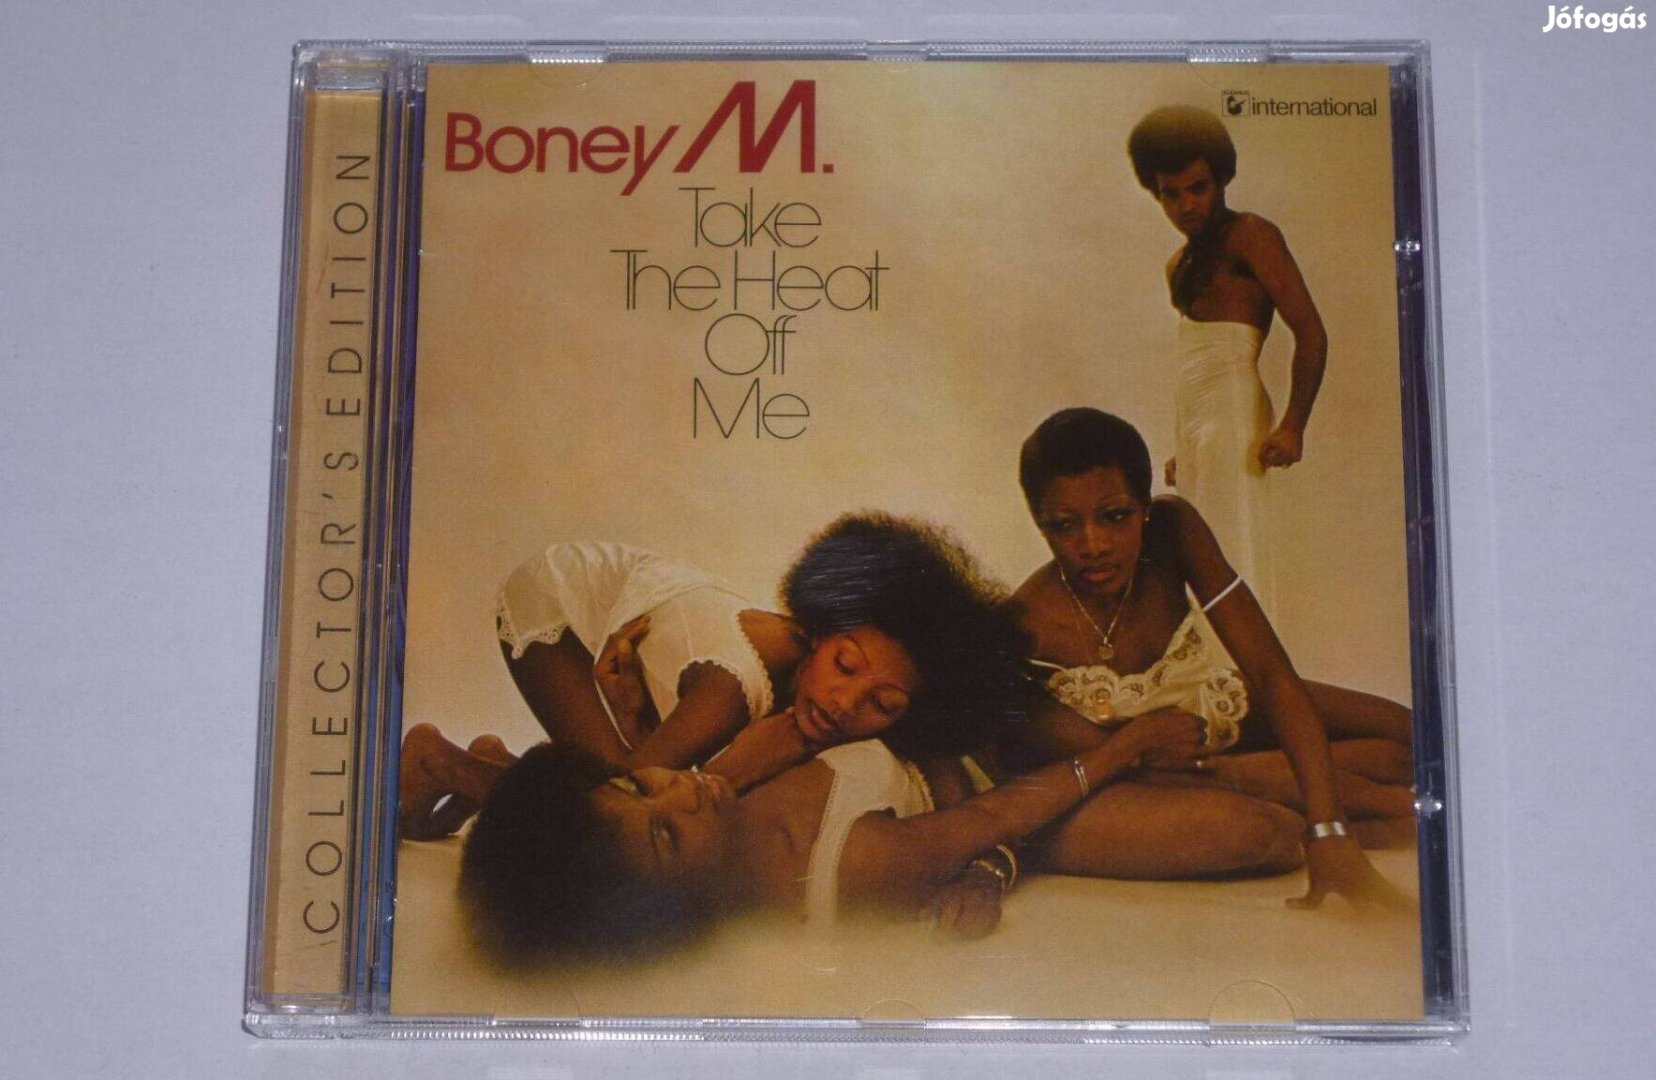 Boney M - Take The Heat Of Me 1976 CD Collector's Edition